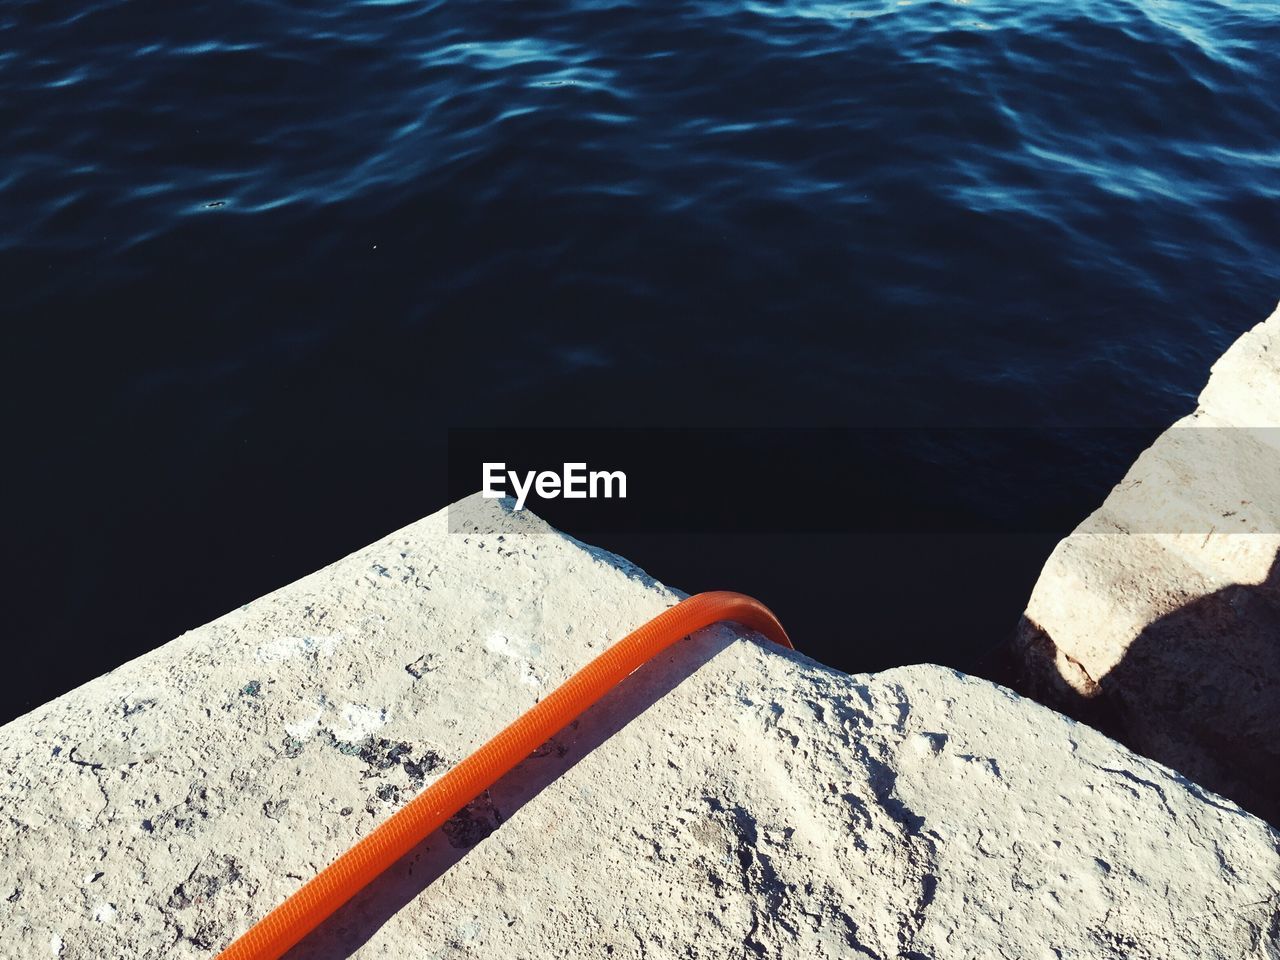 Close-up high angle view of an orange hose disappearing over a wall into the sea